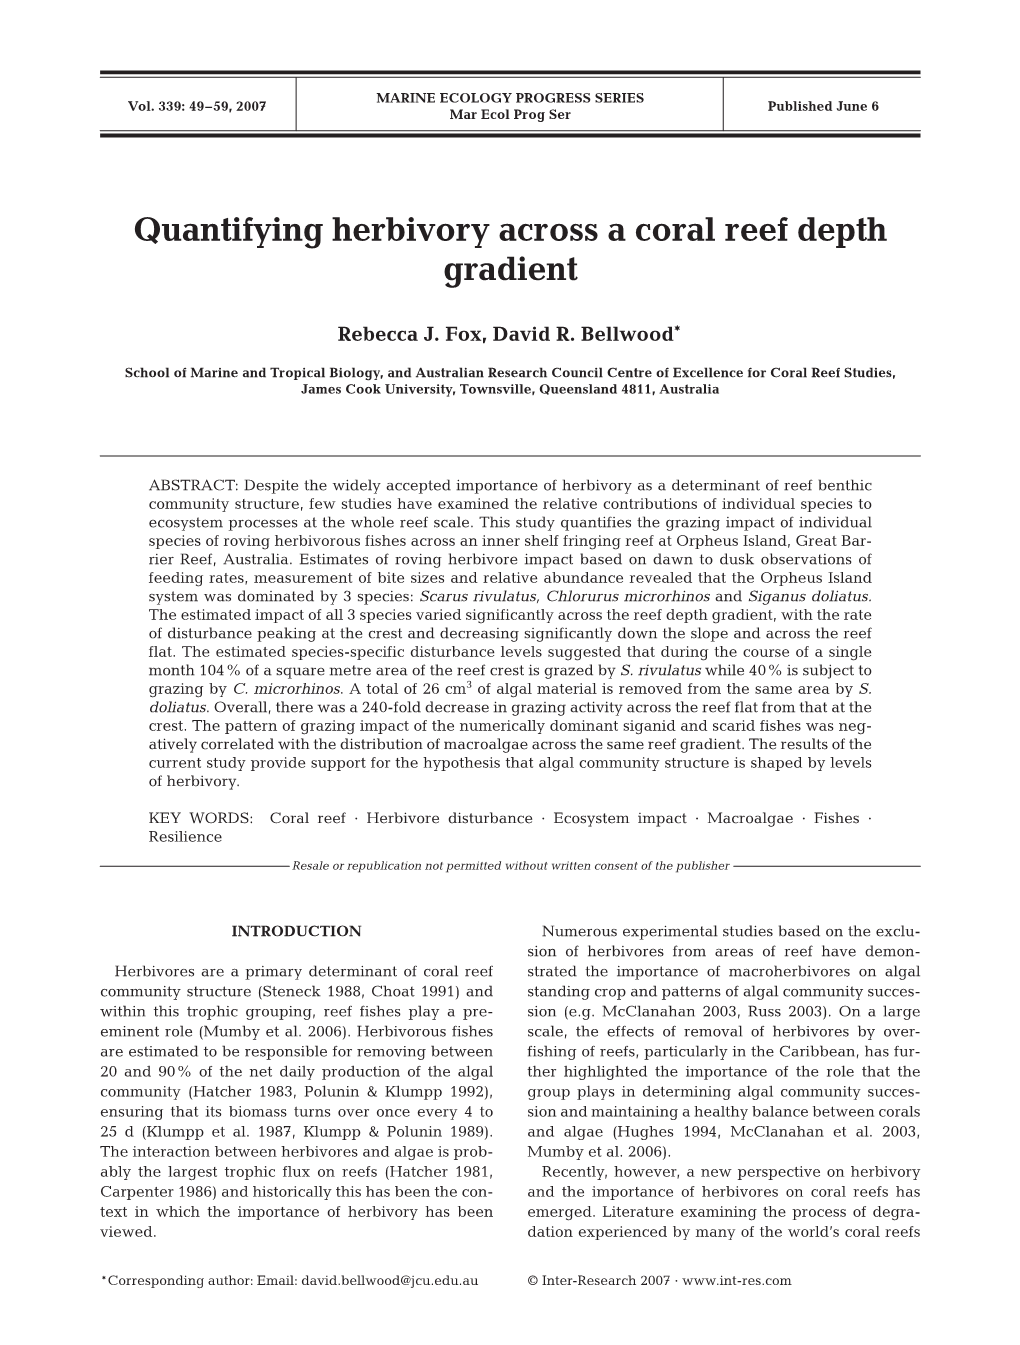 Quantifying Herbivory Across a Coral Reef Depth Gradient